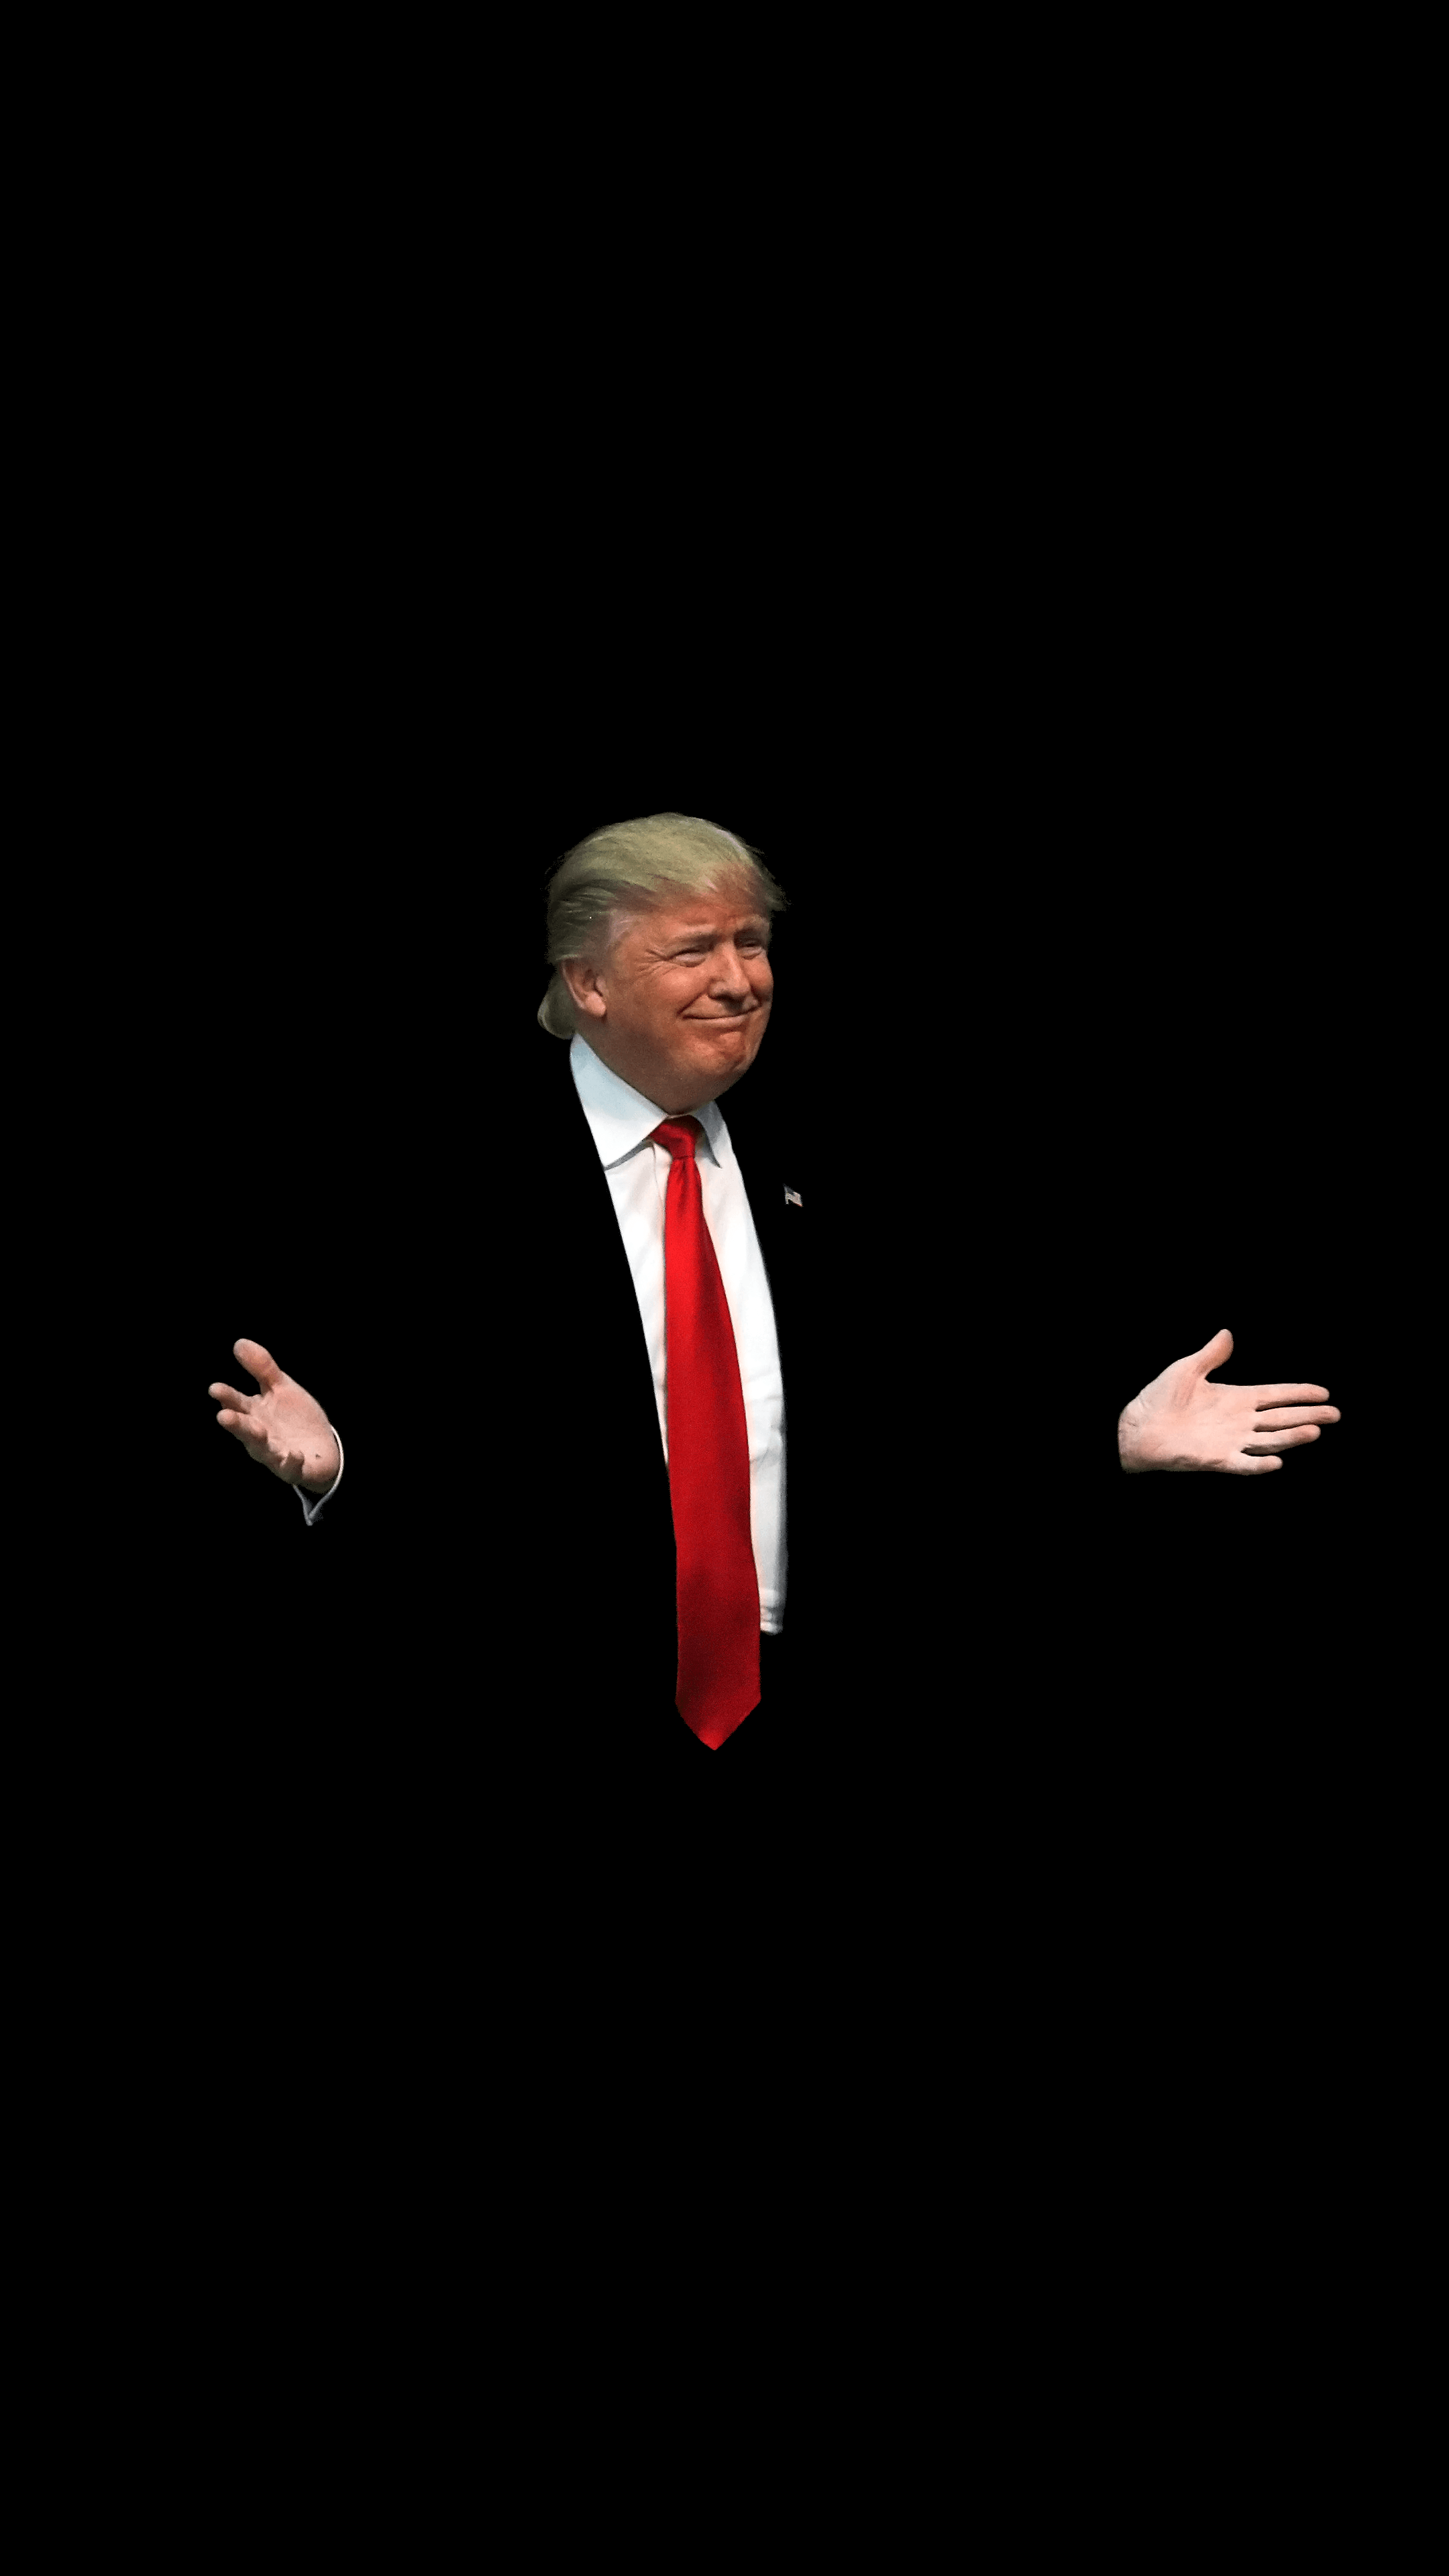 Sweet Donald Trump Wallpaper For You New iPhone X Owners